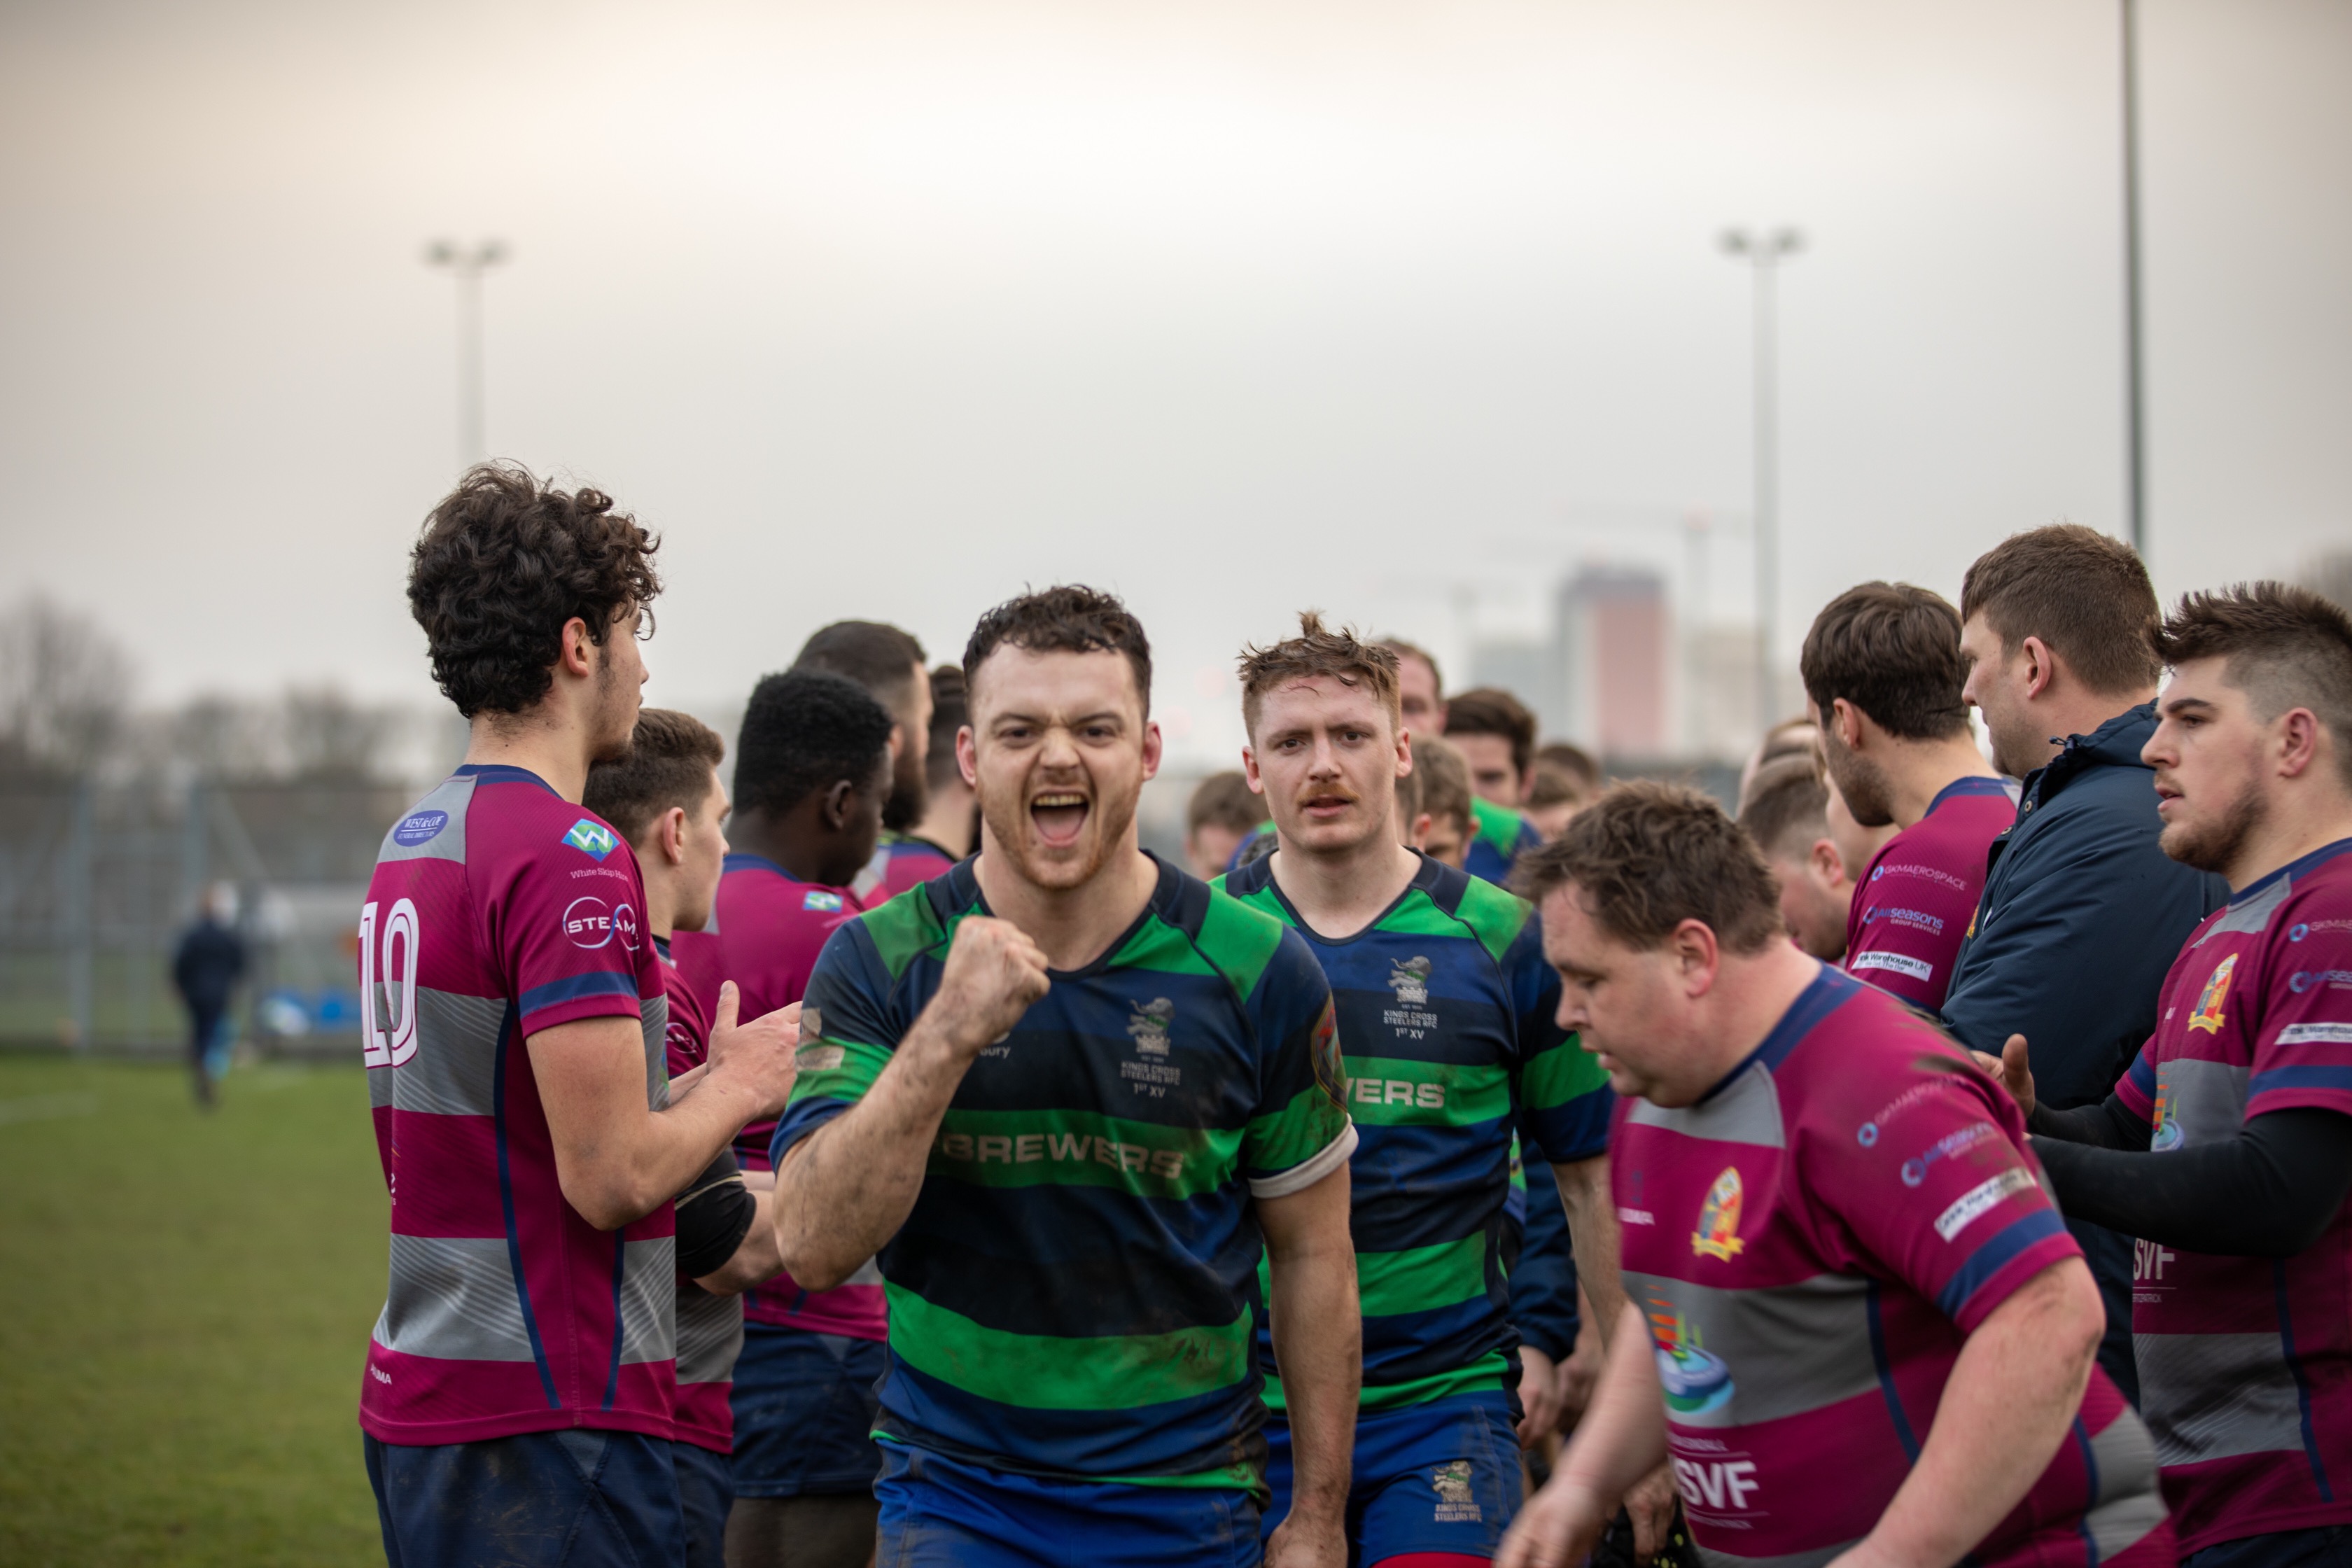 Amazon Prime to launch doc on gay and inclusive rugby club Kings Cross Steelers